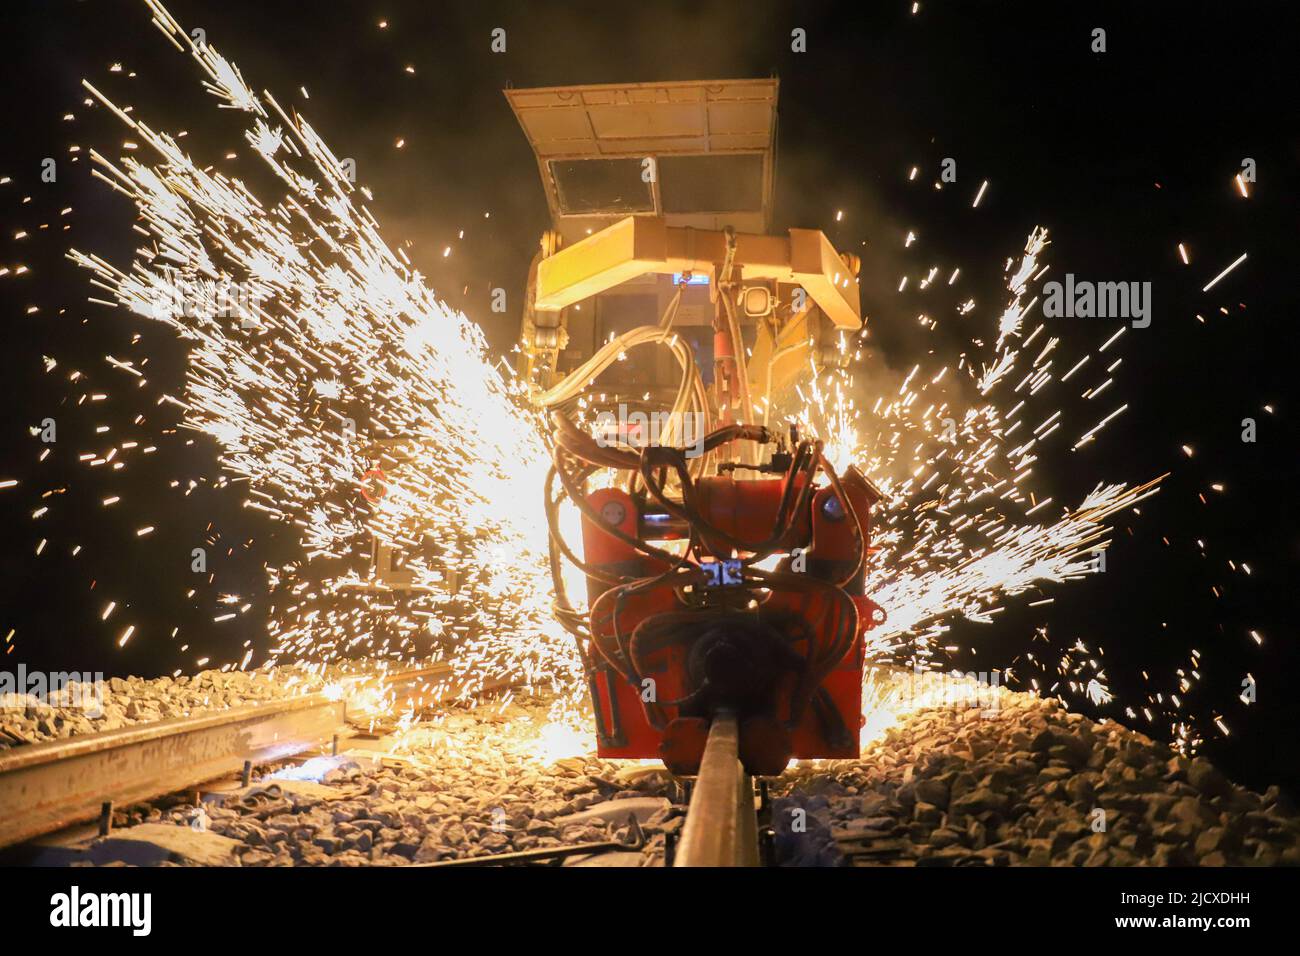 Urumqi. 8th Oct, 2020. A shower of sparks is sent out as a rail welding machine works on the track of the Hotan-Ruoqiang Railway in northwest China's Xinjiang Uygur Autonomous Region, Oct. 8, 2020. Credit: Guo Baolin/Xinhua/Alamy Live News Stock Photo